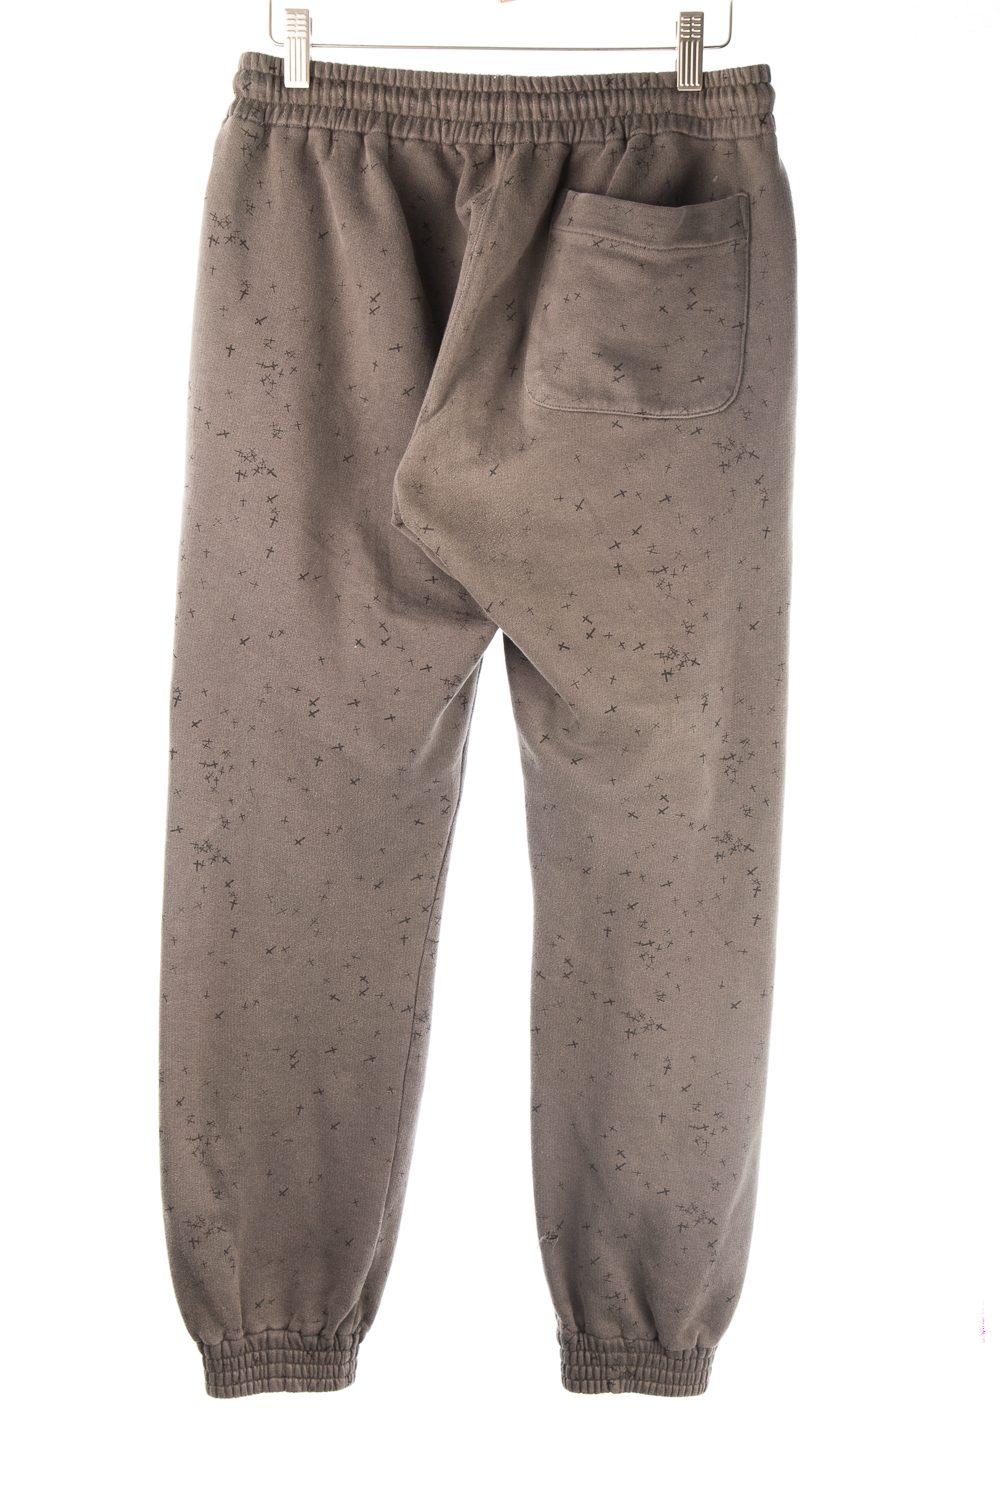 FW02 Witch’s Cell Division SweatPants